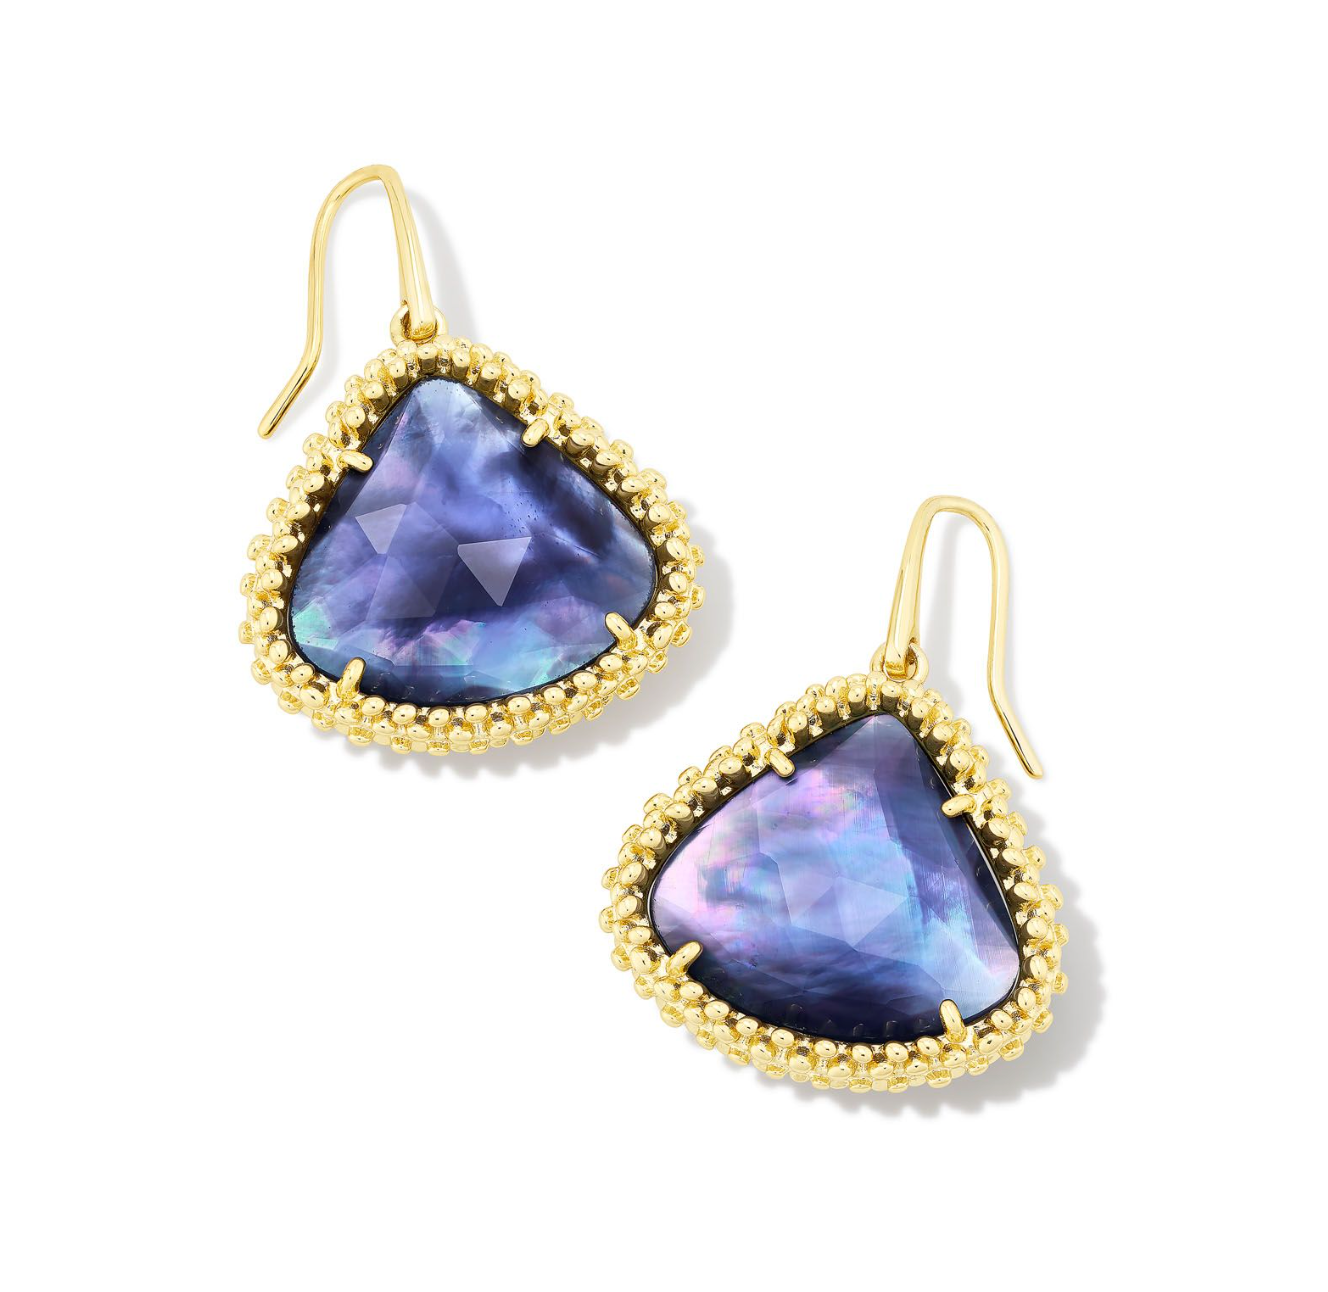 Framed Kendall Gold Large Drop Earrings in Dark Lavender Illusion | KENDRA SCOTT - The Street Boutique 